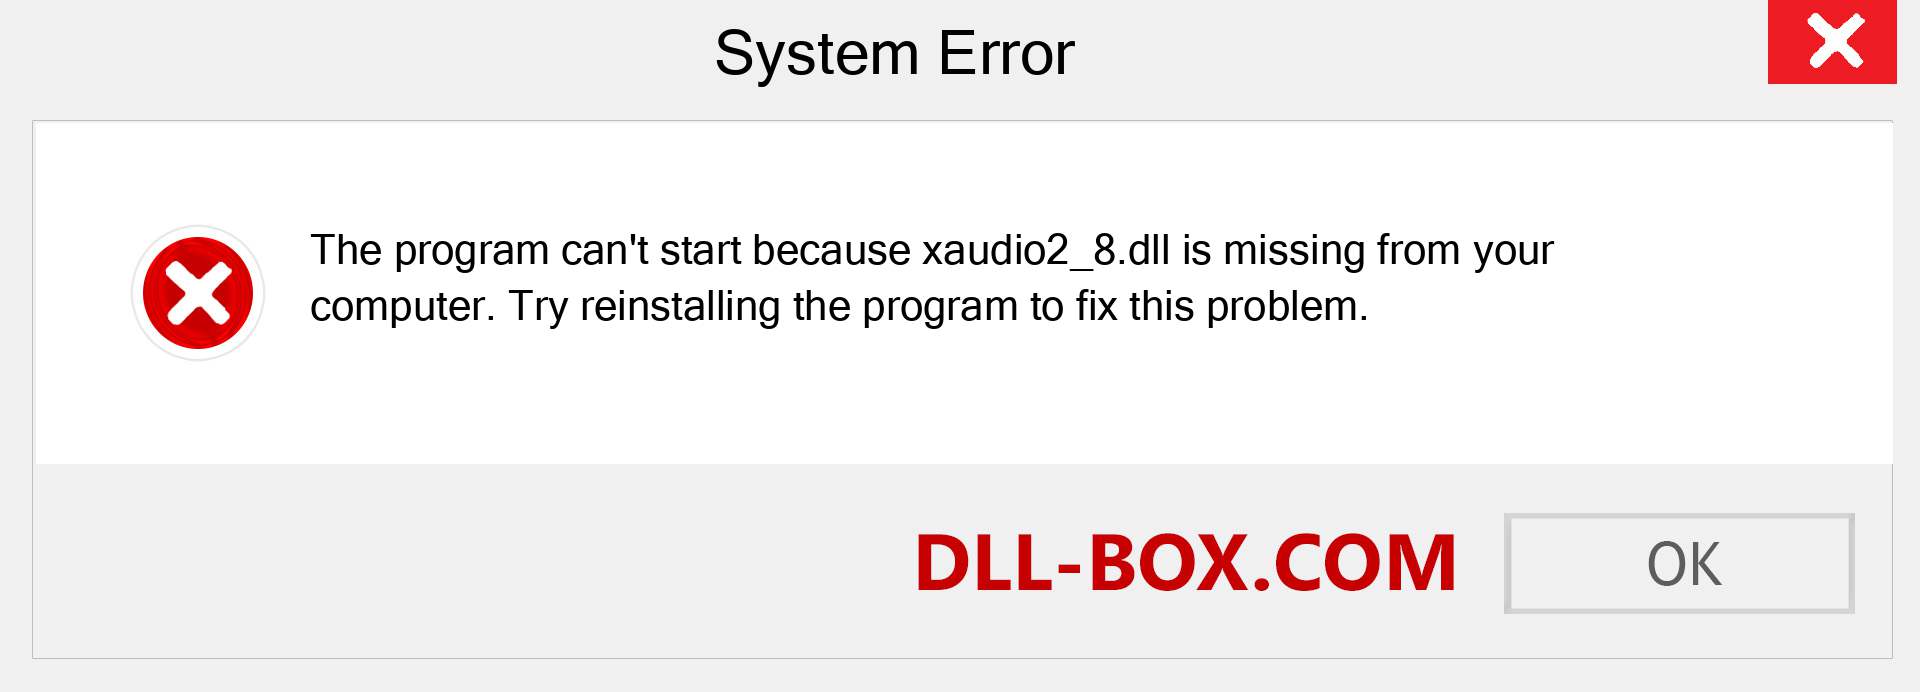  xaudio2_8.dll file is missing?. Download for Windows 7, 8, 10 - Fix  xaudio2_8 dll Missing Error on Windows, photos, images